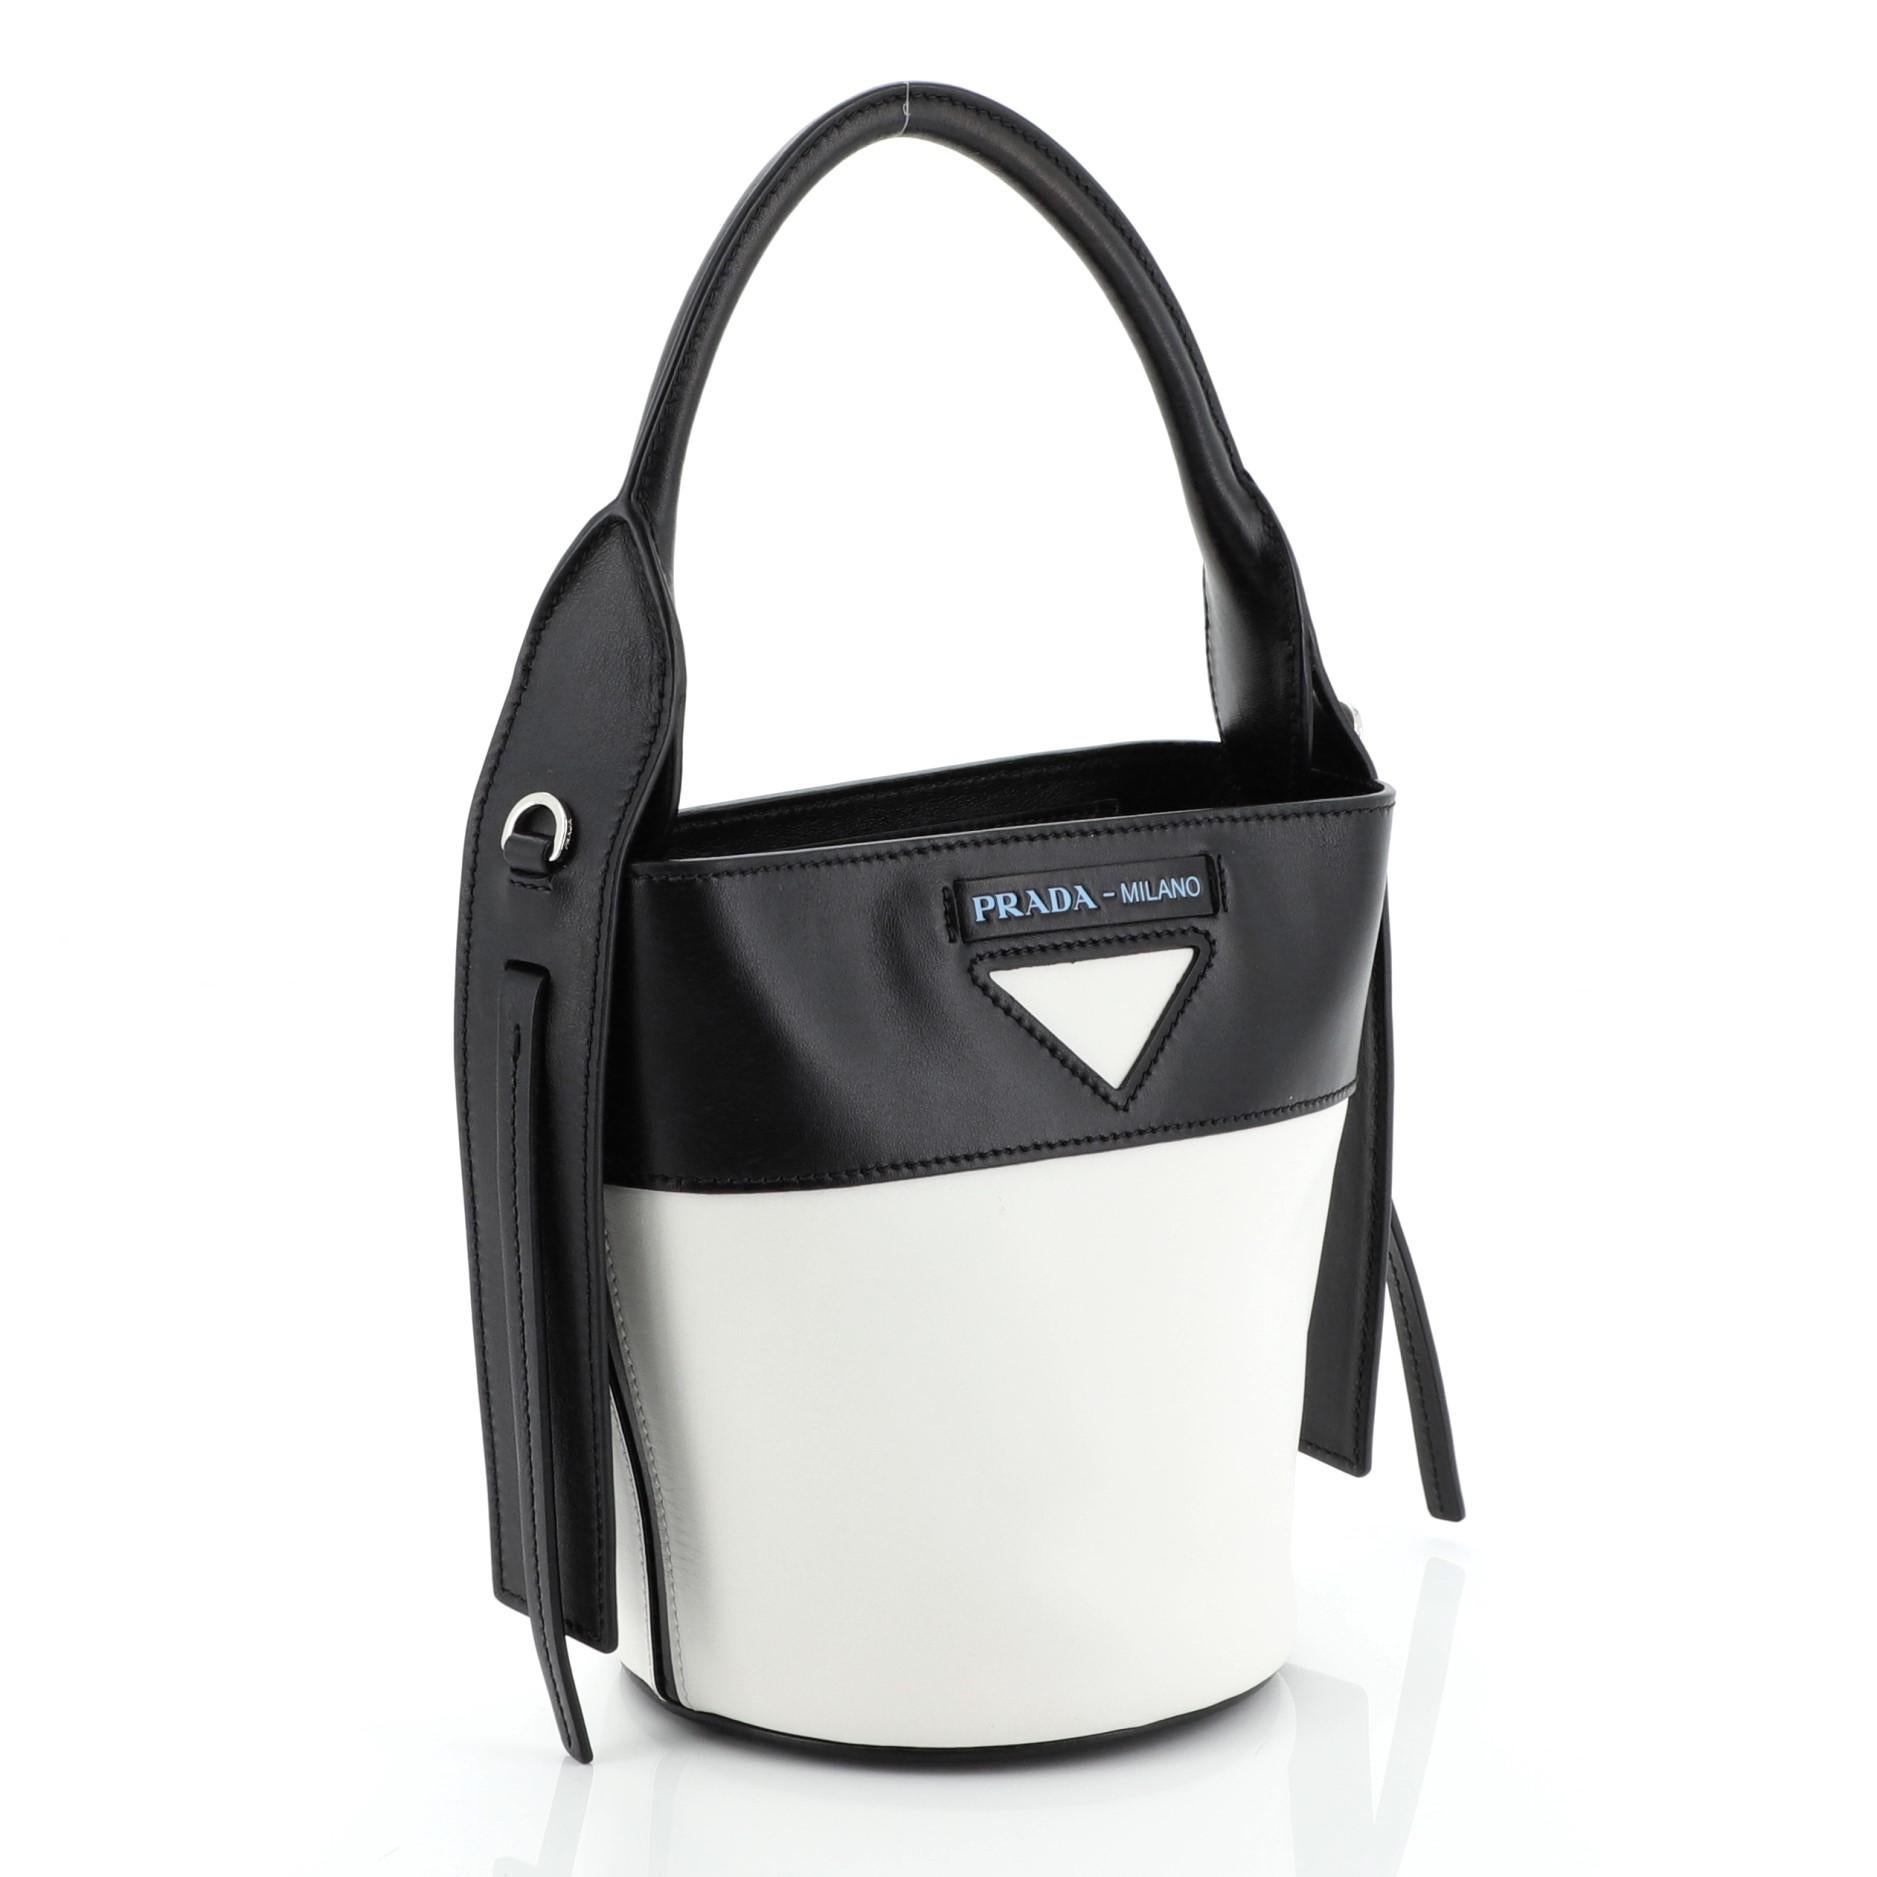 This Prada Ouverture Bucket Bag Leather, crafted from white and black leather, features rolled top handle and silver-tone hardware. Its zip closure opens to a black leather interior. 

Estimated Retail Price: $1,330
Condition: Great. Scuffs and